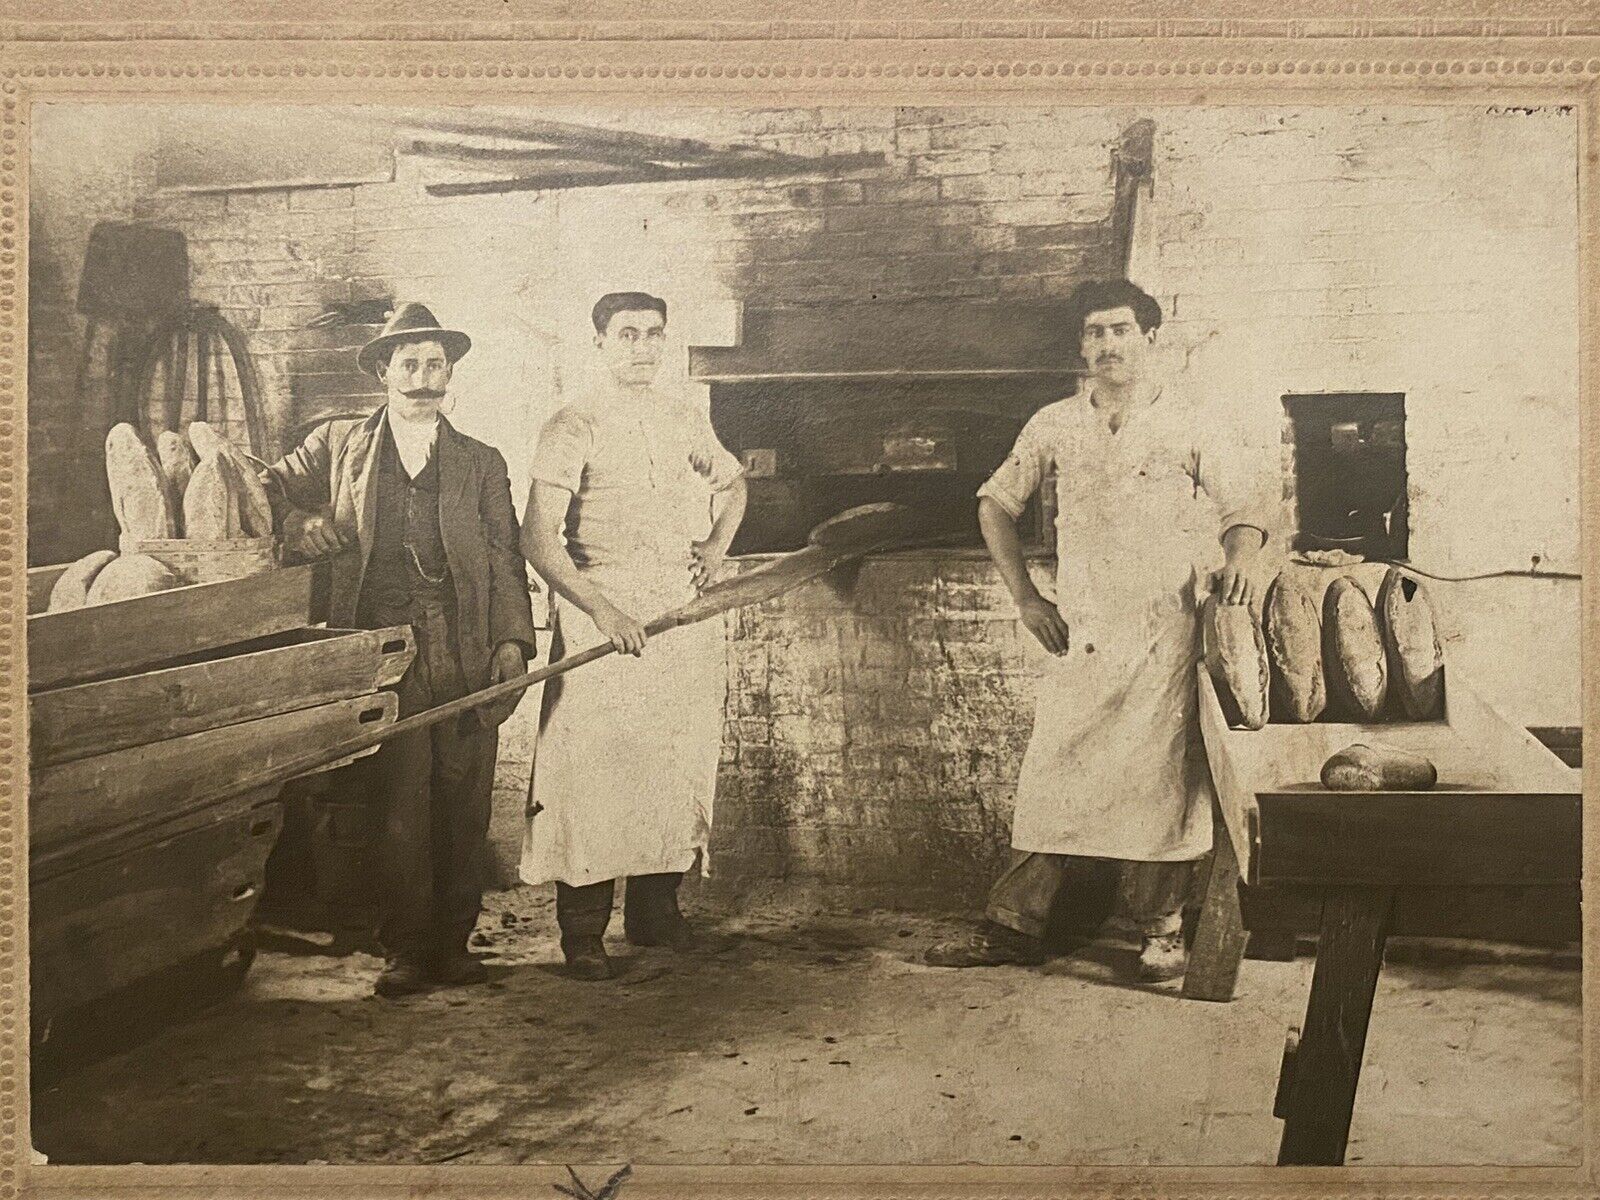 Circa 1890 Excellent Photo Of Bakers Baking Bread In Oven Bakery Shop 19th C.